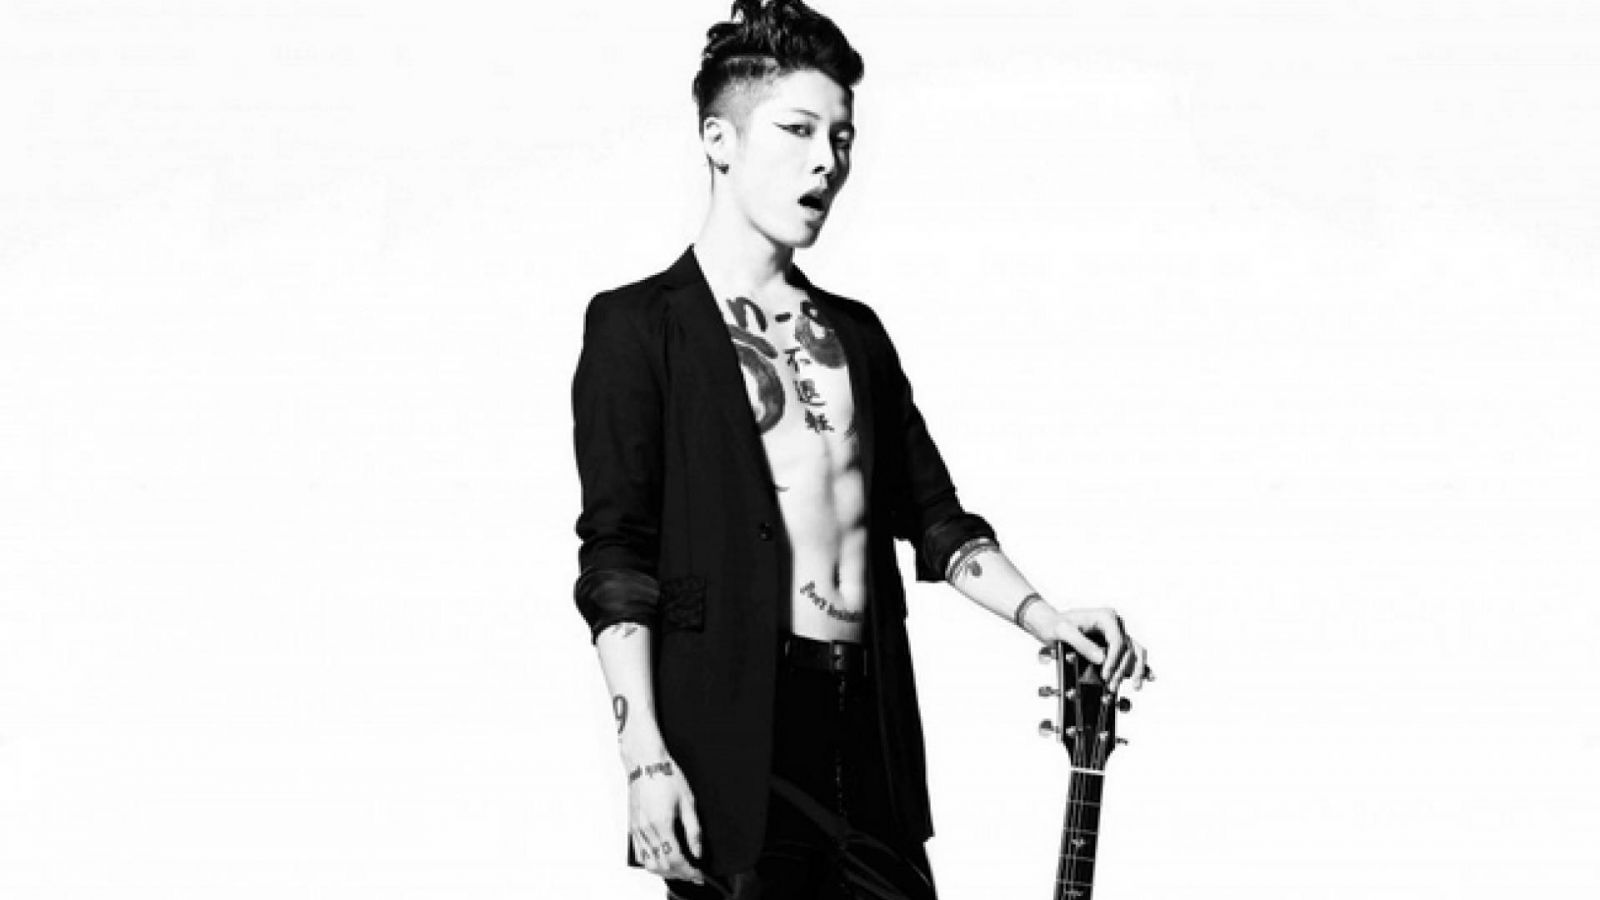 MIYAVI - THE OTHERS © 2014 UNIVERSAL MUSIC LLC All rights reserved.